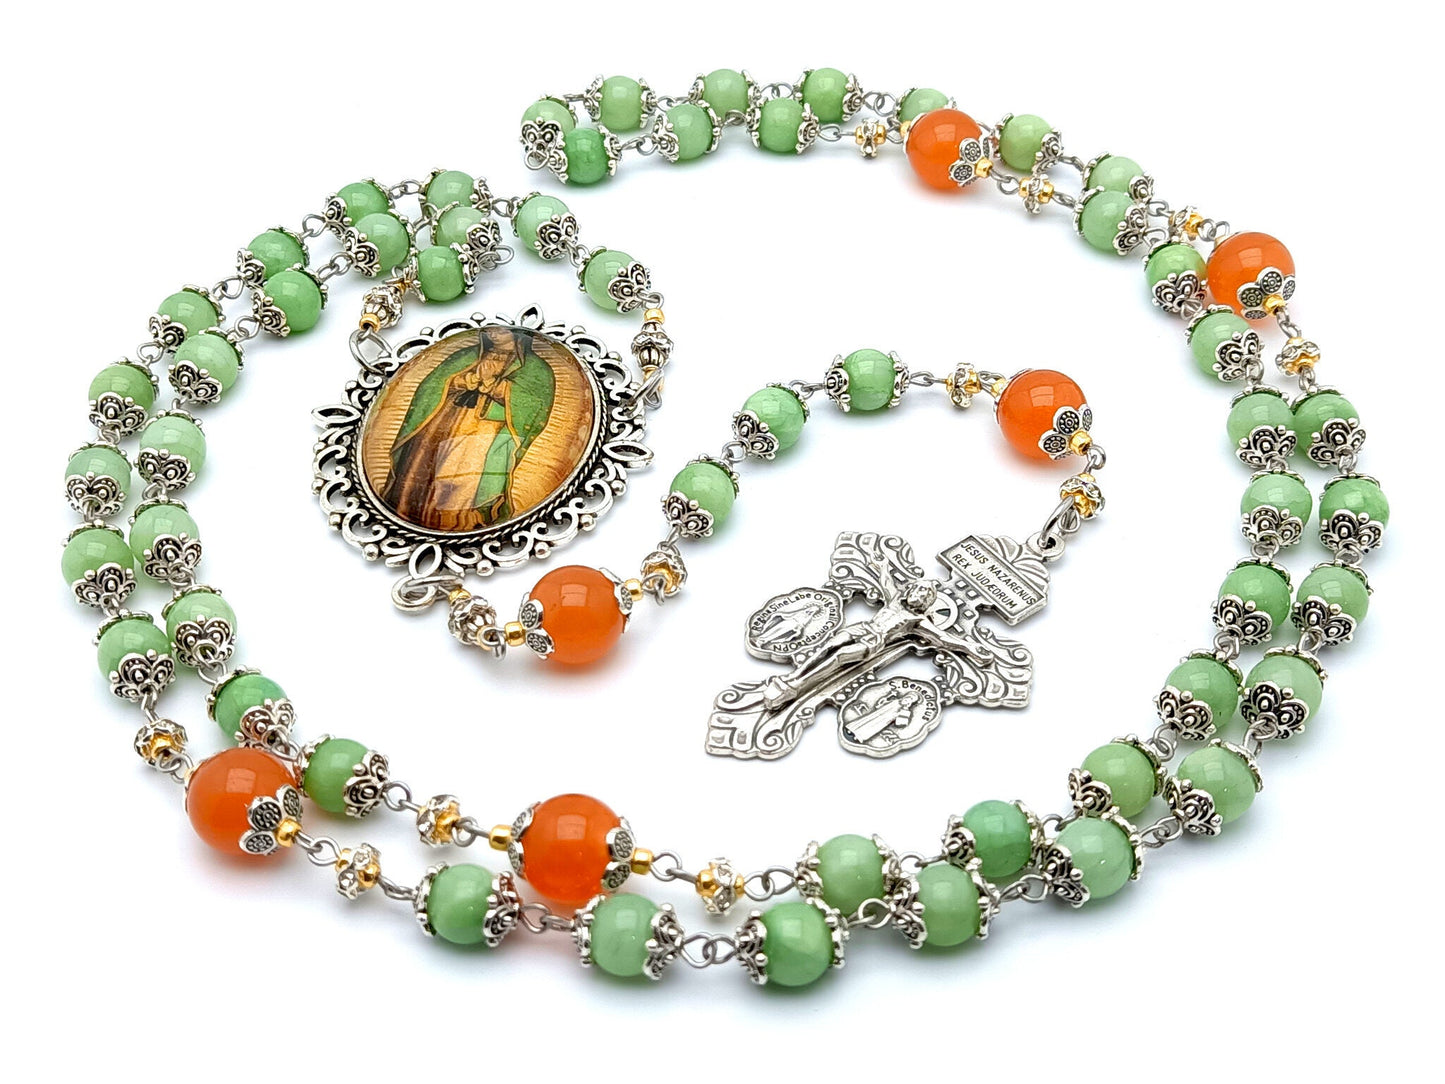 Our Lady of Guadalupe unique rosary beads with green and orange gemstone beads, silver pardon crucifix and picture centre medal.